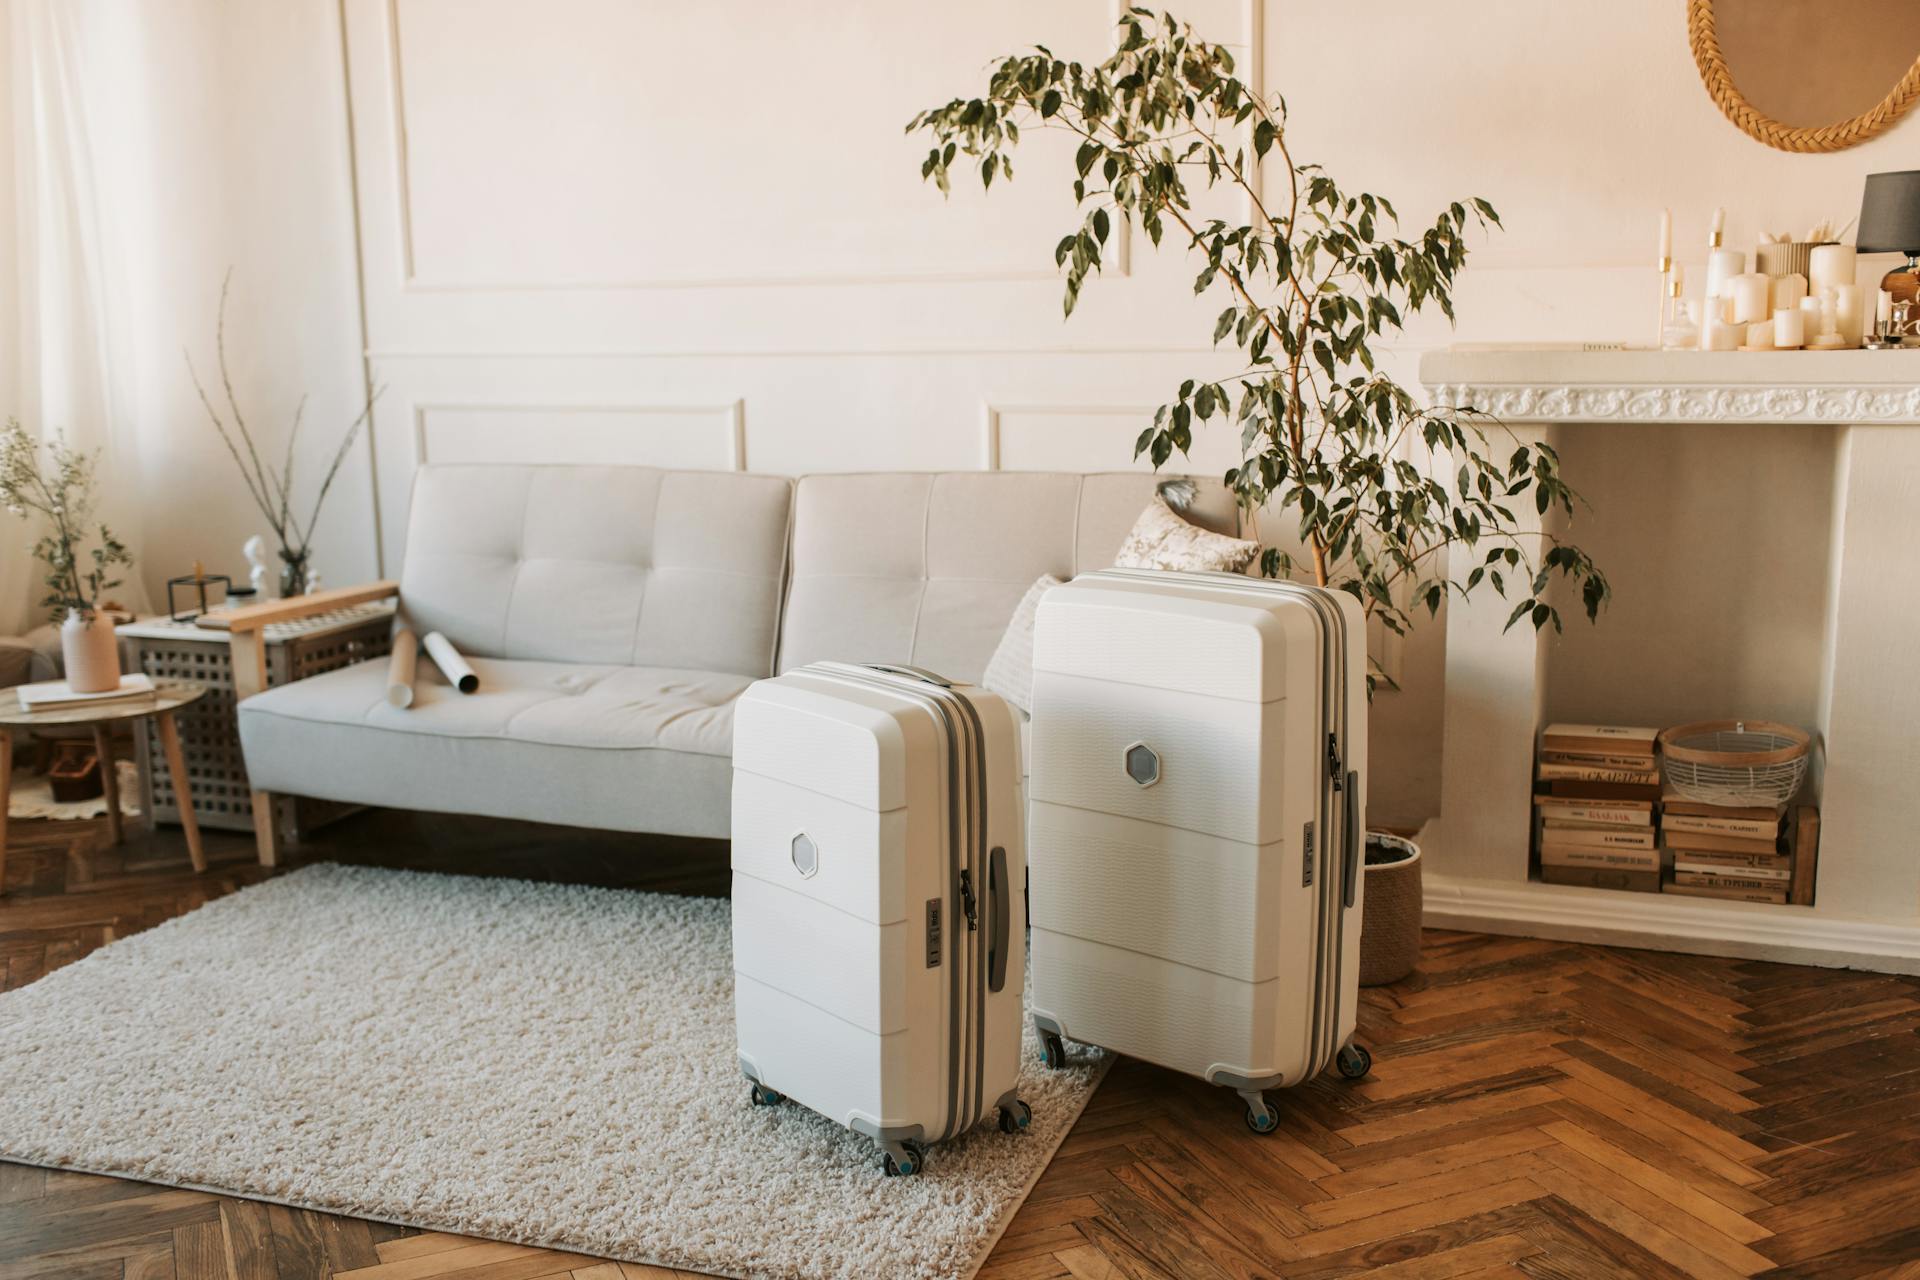 Packed suitcases | Source: Pexels